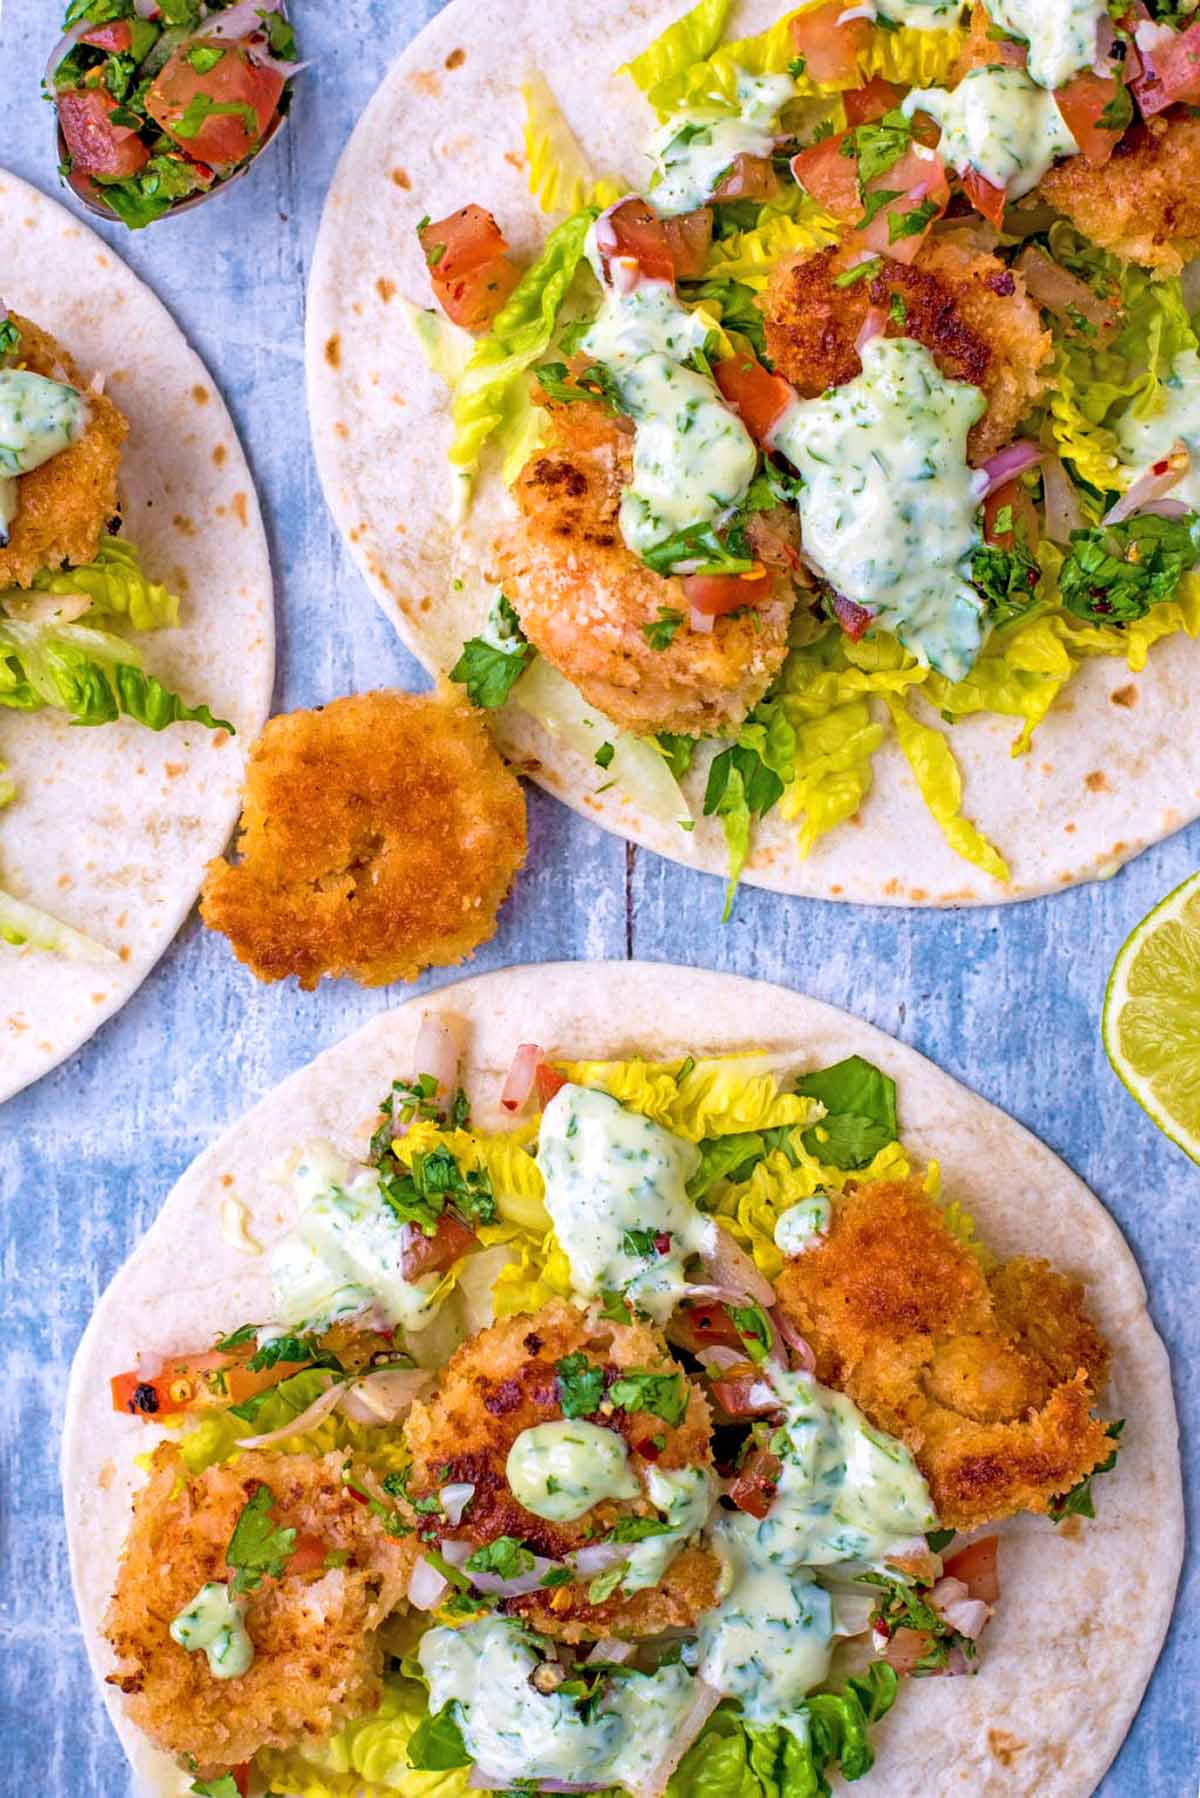 Crispy Prawn Tacos with lettuce and salsa with a drizzle of creamy sauce.